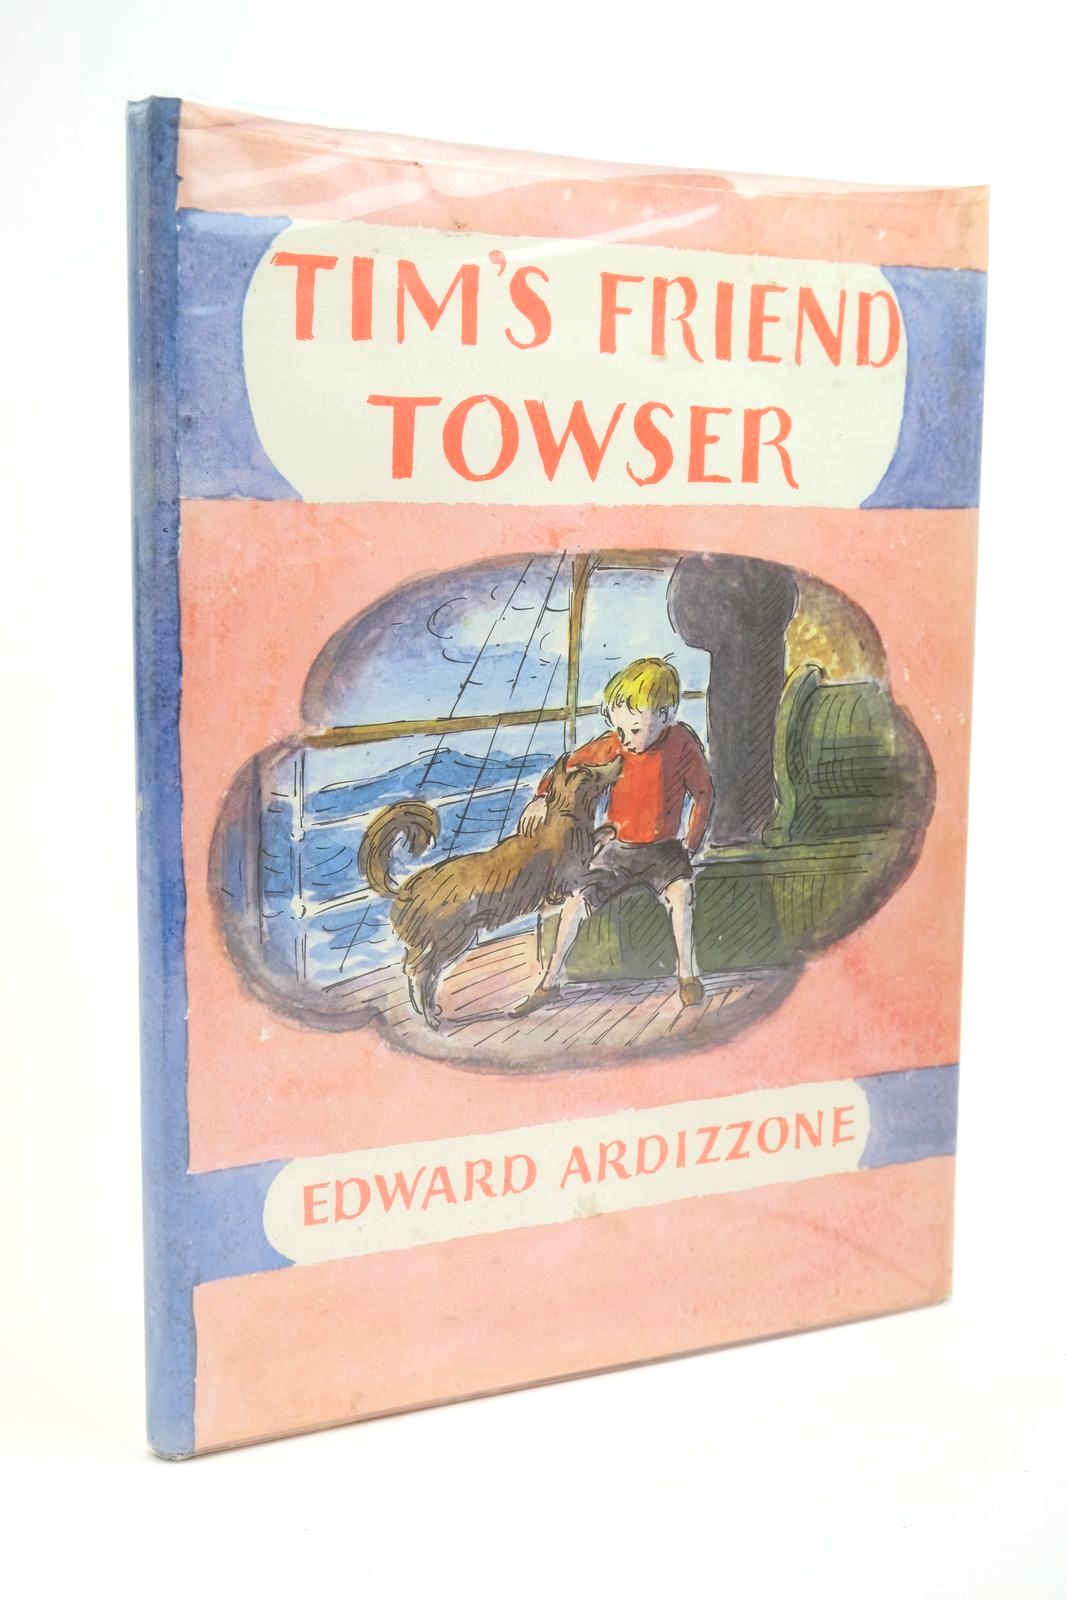 Photo of TIM'S FRIEND TOWSER written by Ardizzone, Edward illustrated by Ardizzone, Edward published by Oxford University Press (STOCK CODE: 1323231)  for sale by Stella & Rose's Books